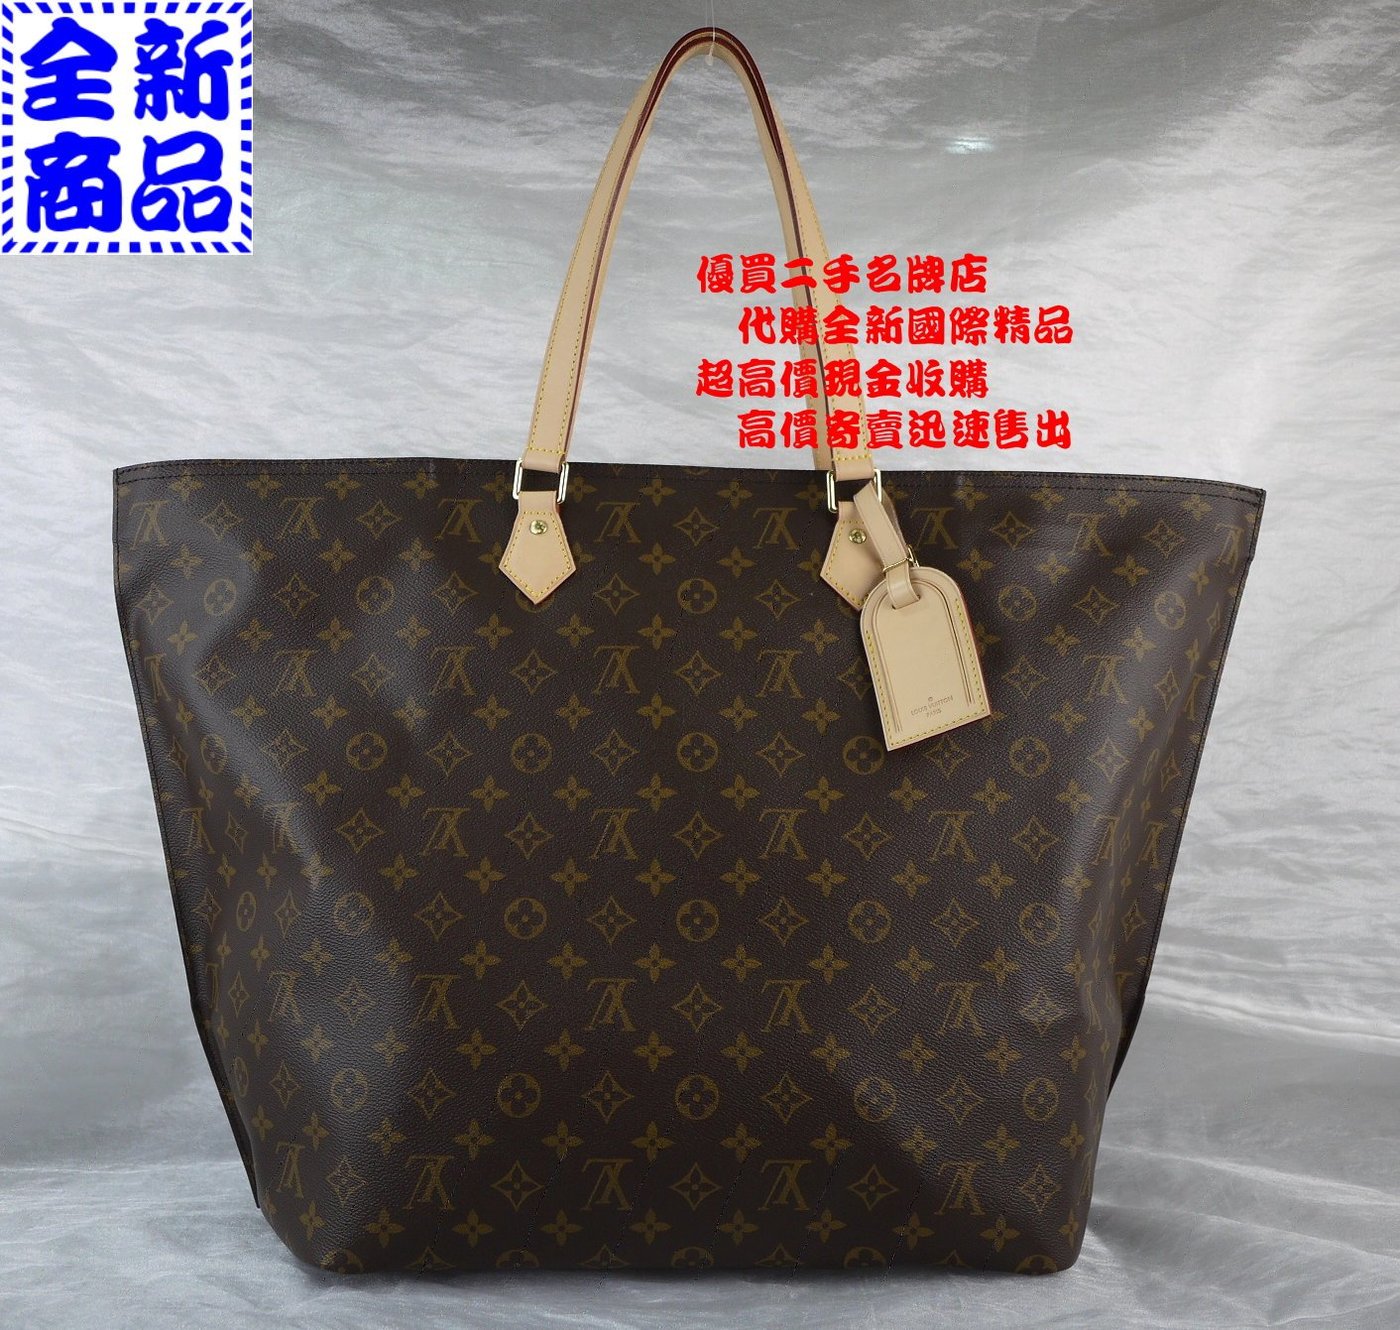 LOUIS VUITTON】ルイヴィトン『モノグラム エクサントリ シテ』M51161